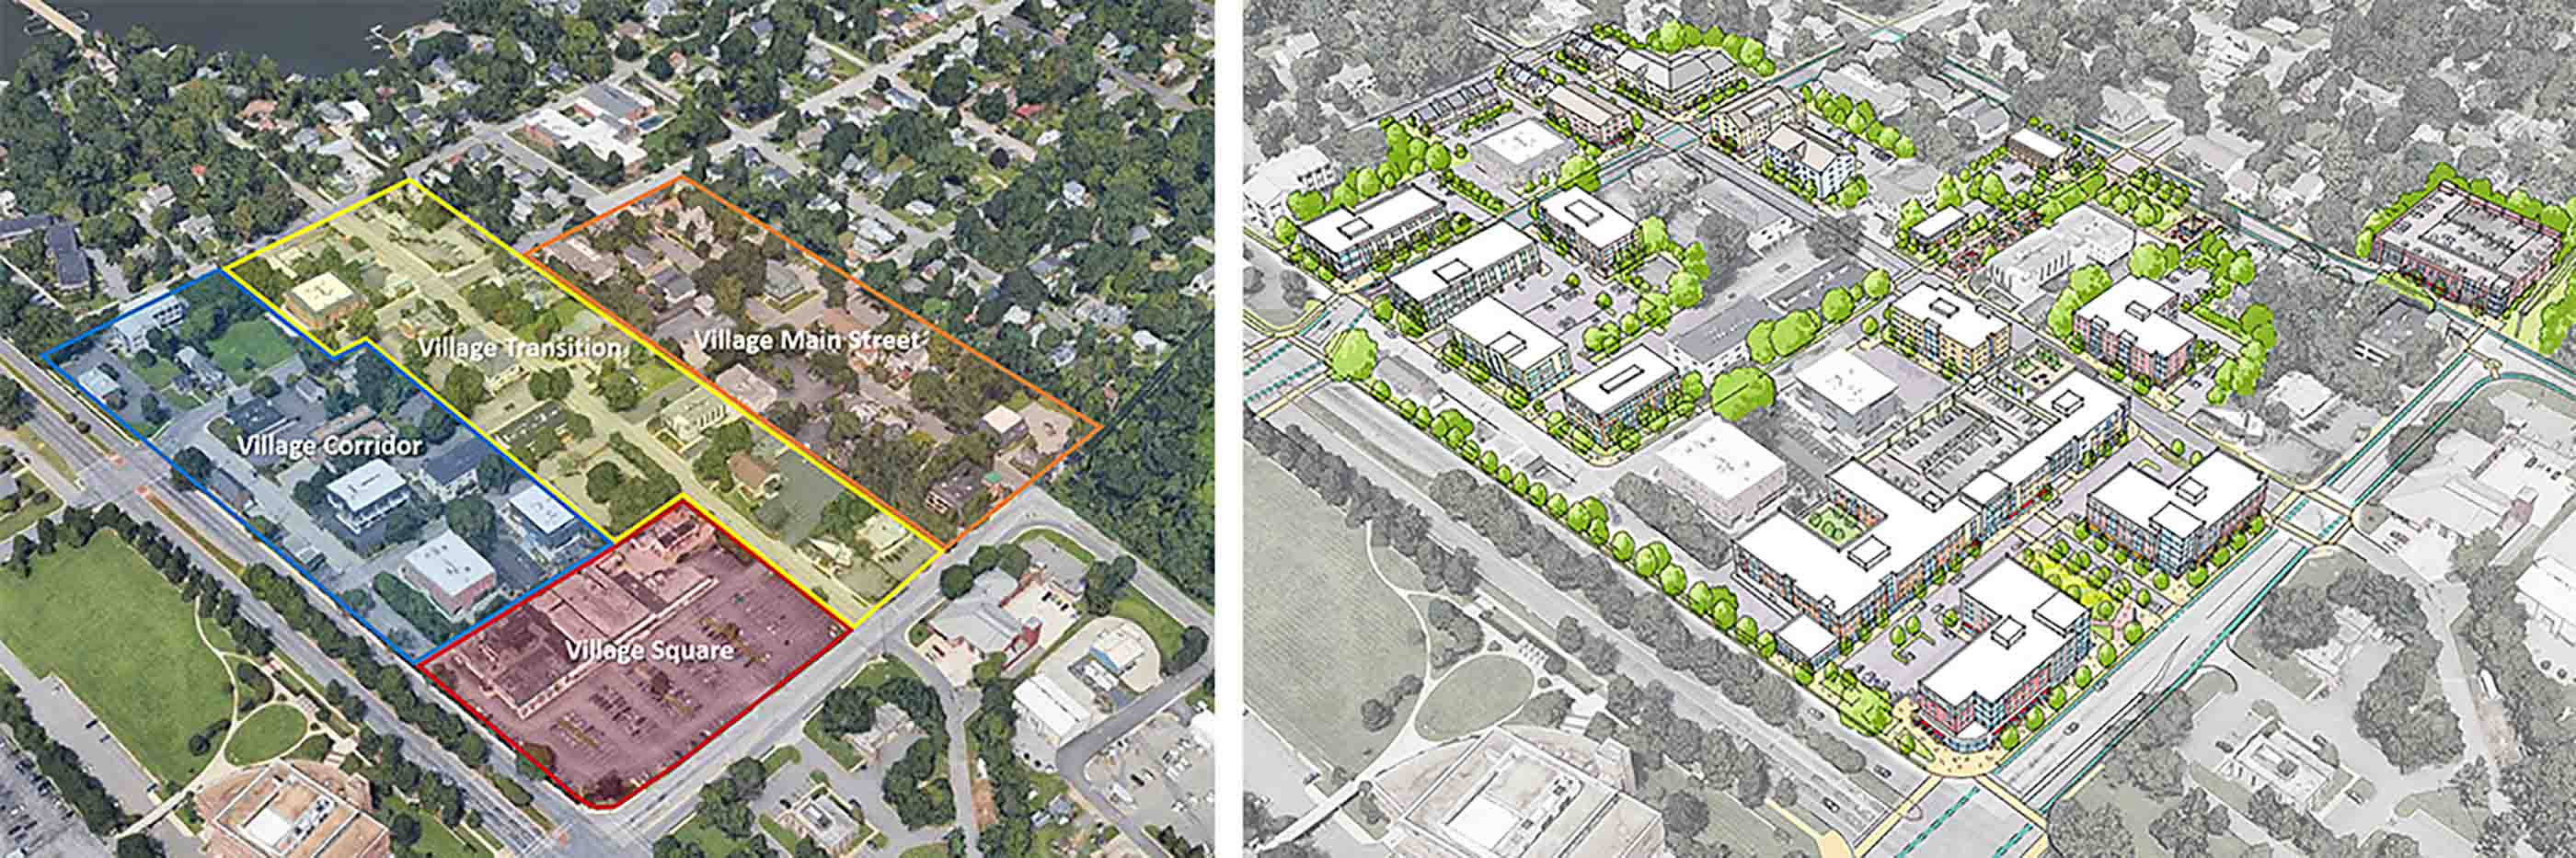 West Annapolis Master Plan in Maryland Stantec